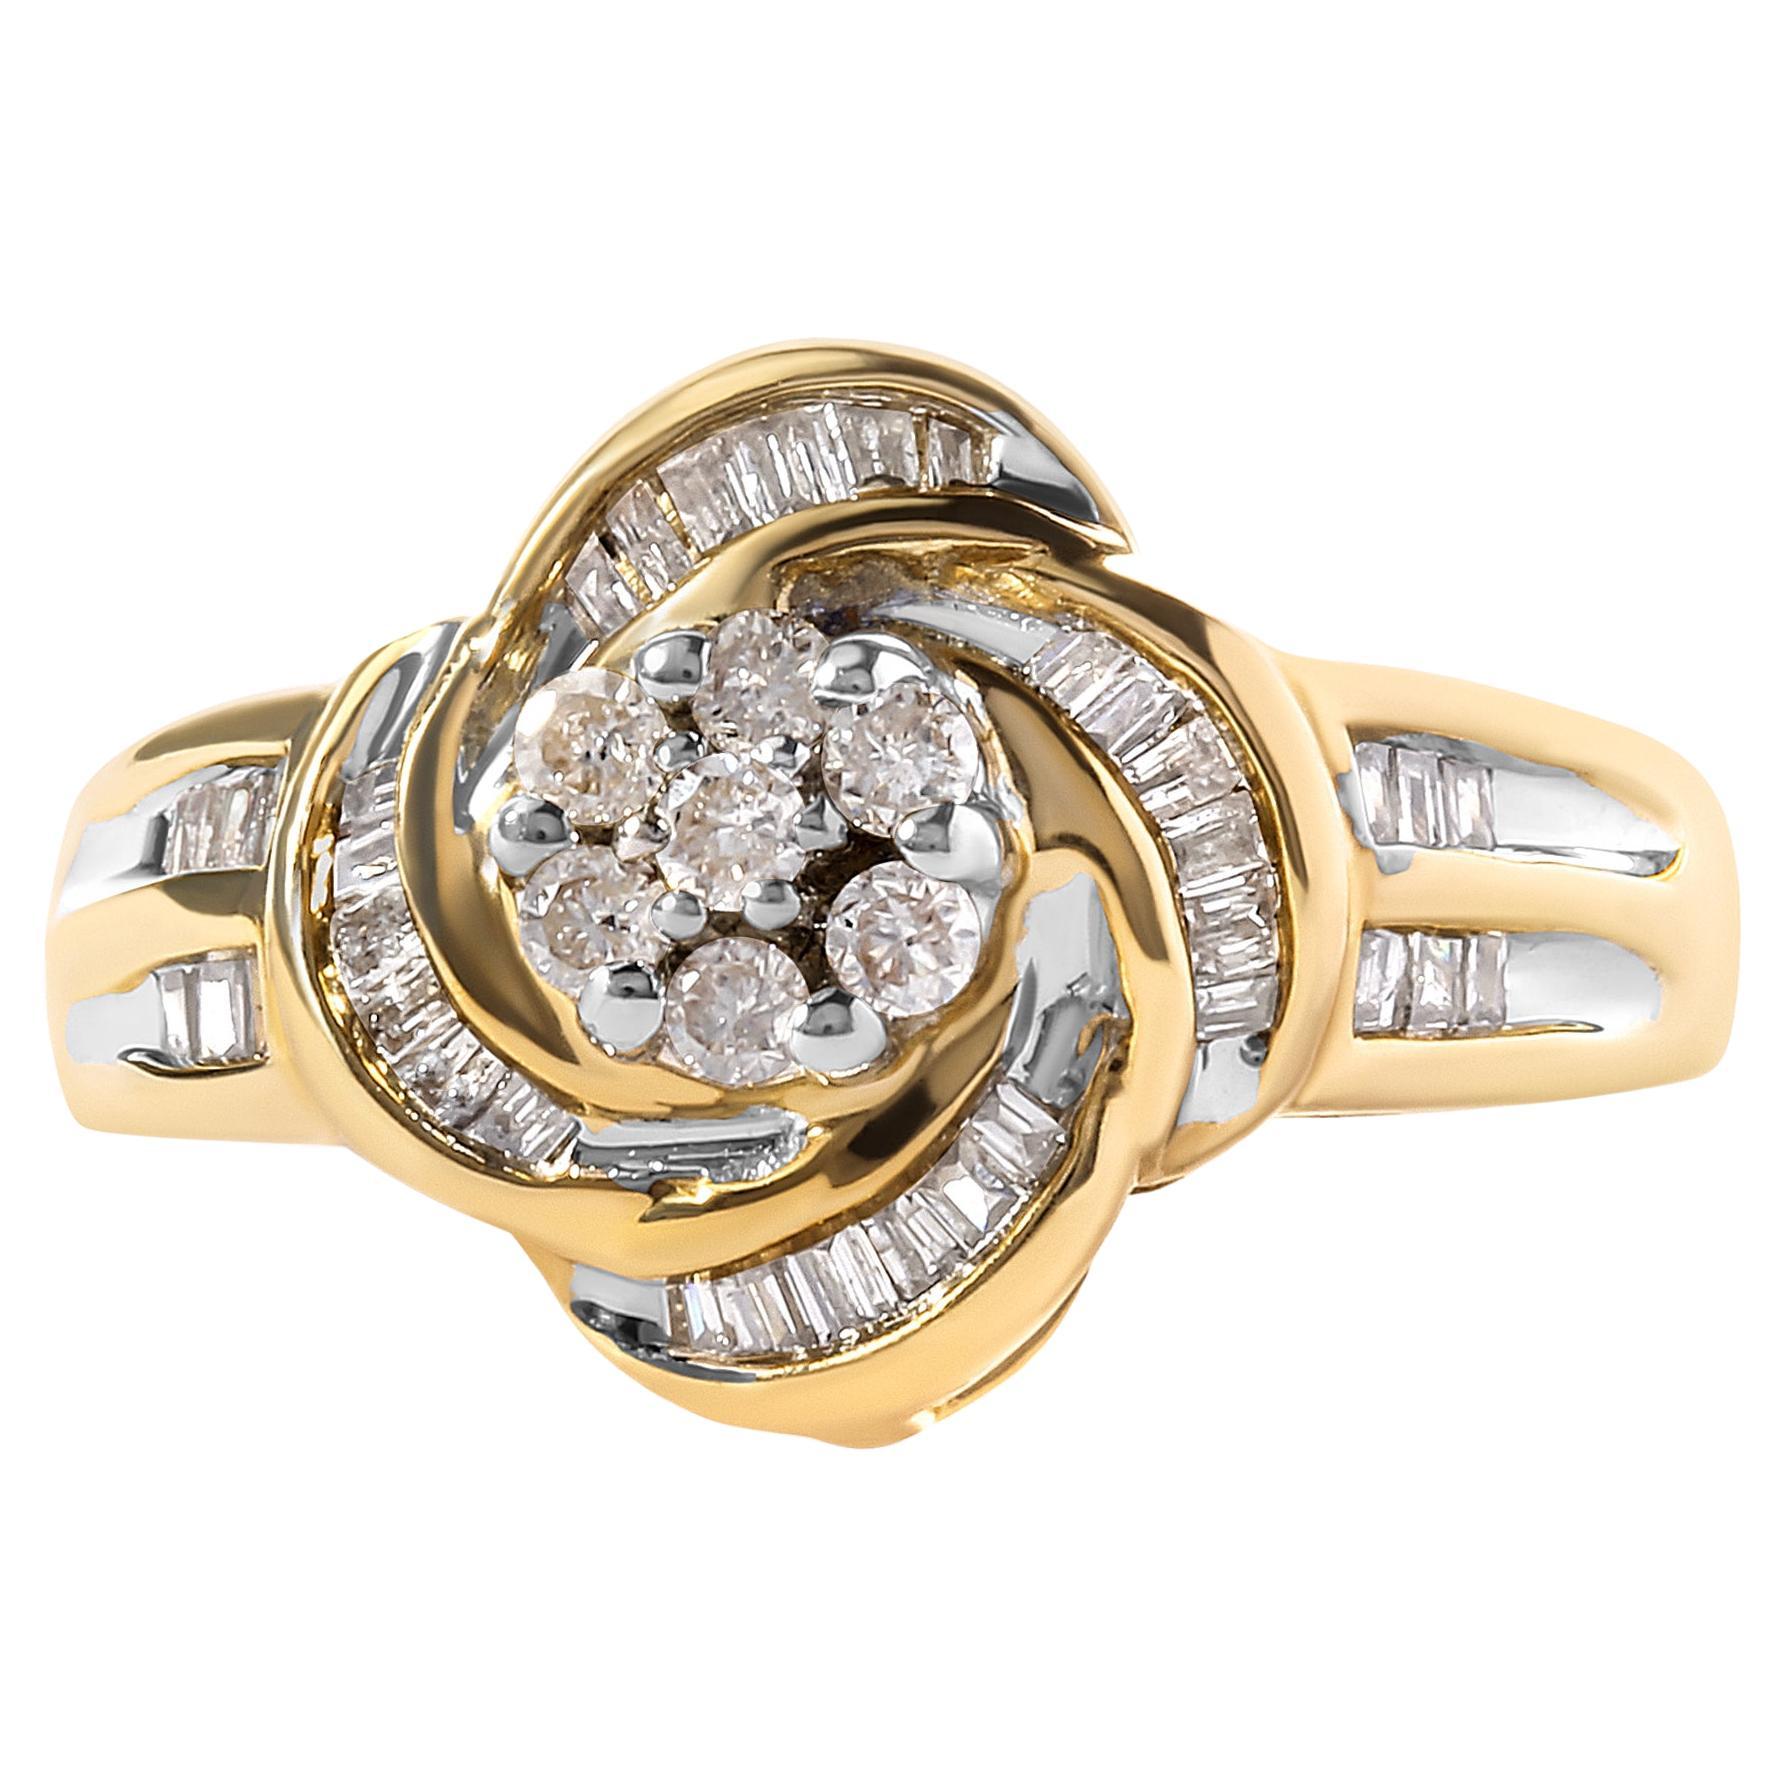 10K Yellow Gold 1/2 Carat Round and Baguette Diamond Flower Swirl Cocktail Ring